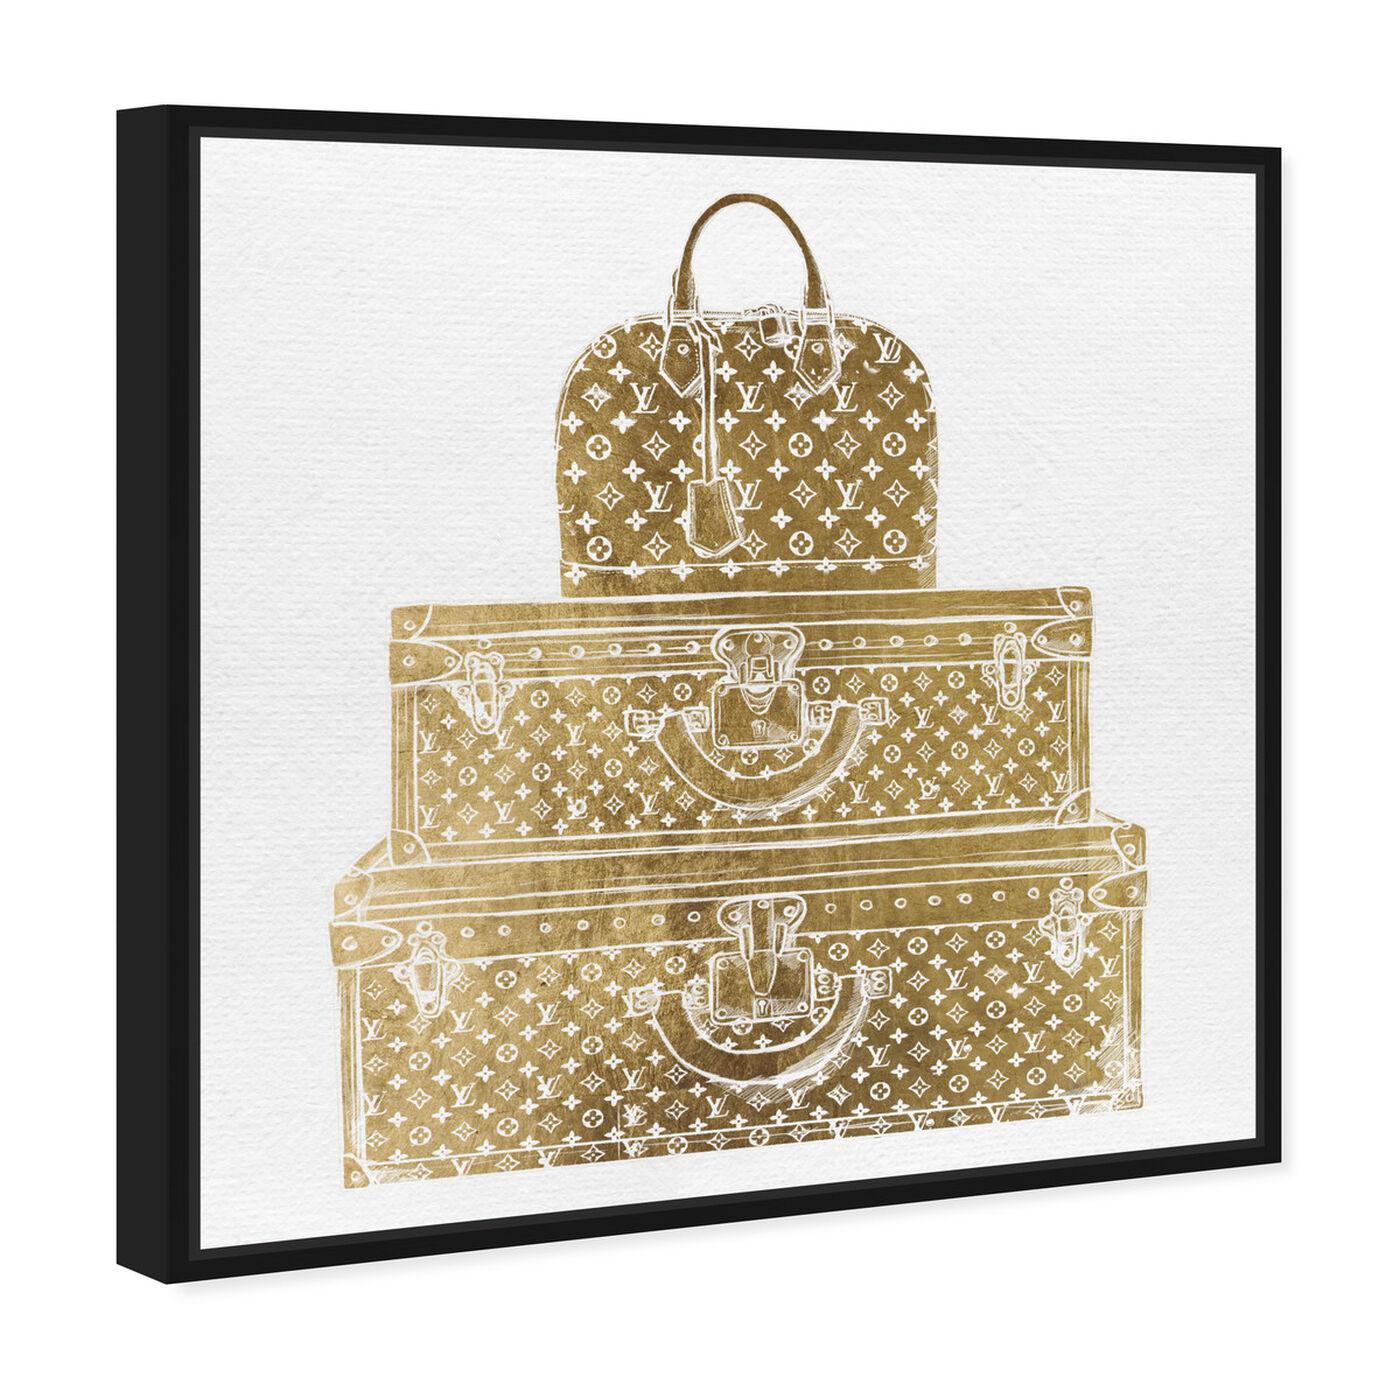 Royal Bag and Luggage Gold | Fashion and Glam Wall Art by Oliver Gal